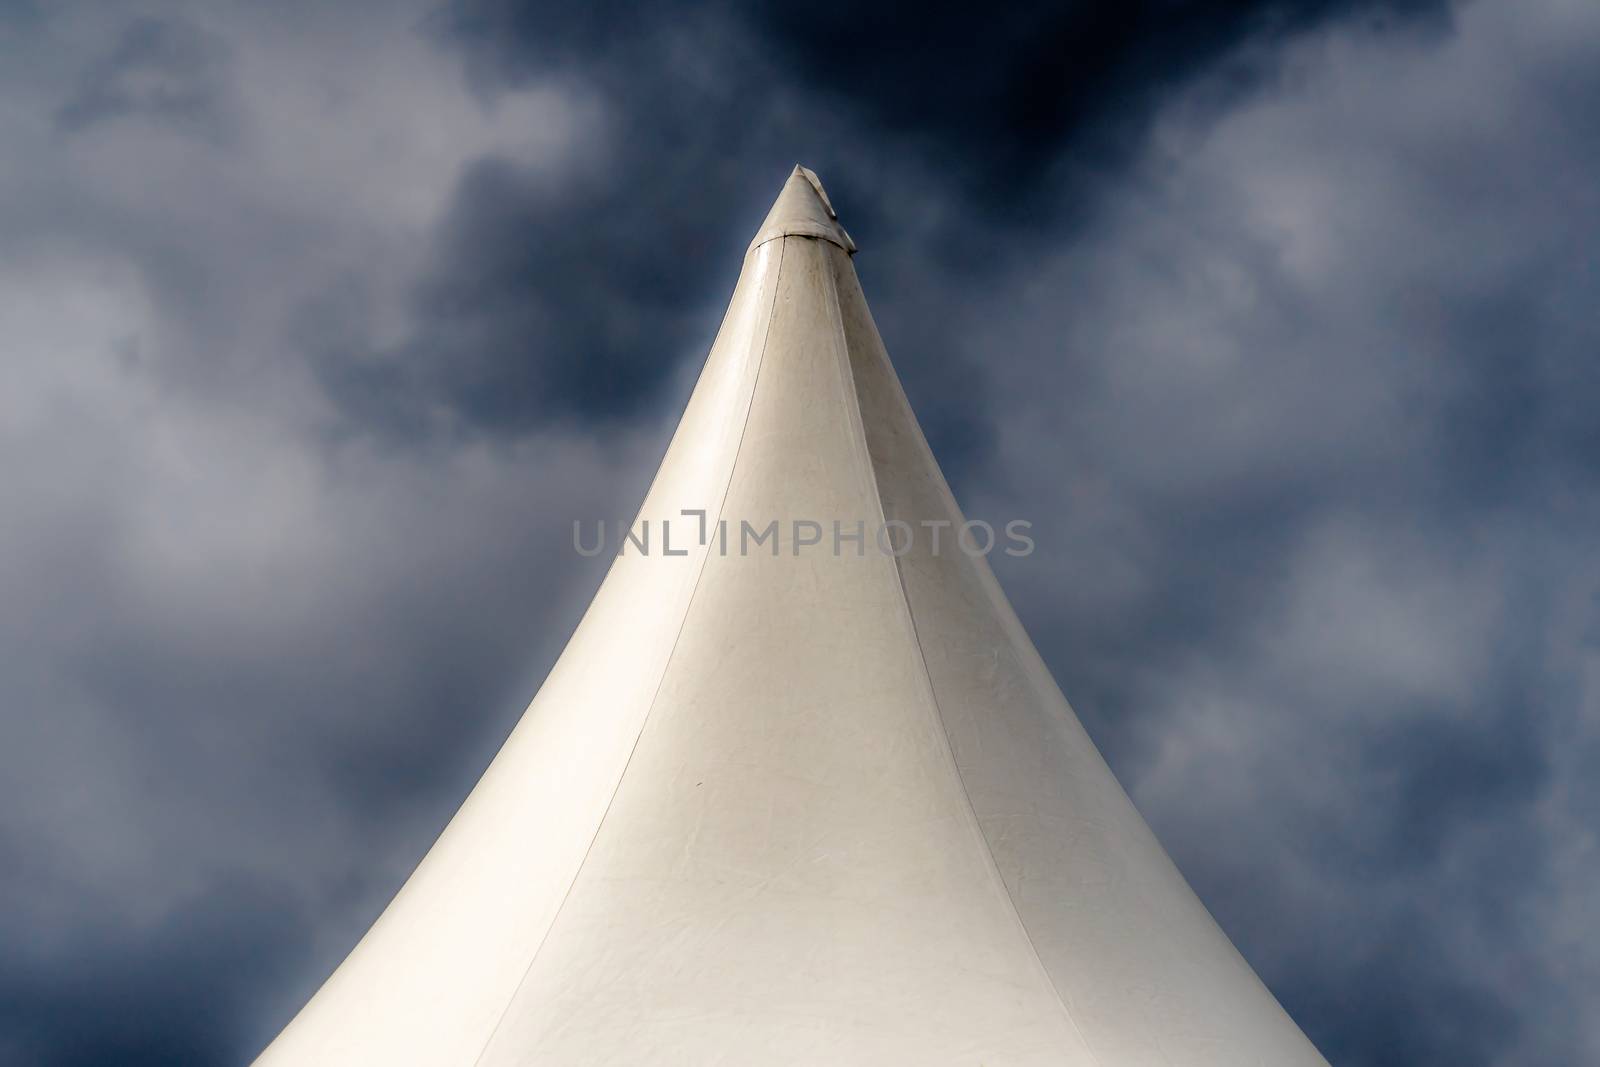 Abstract artistic shot from the top of a white tent in front of a threatening dramatic grey sky with clouds, wallpaper